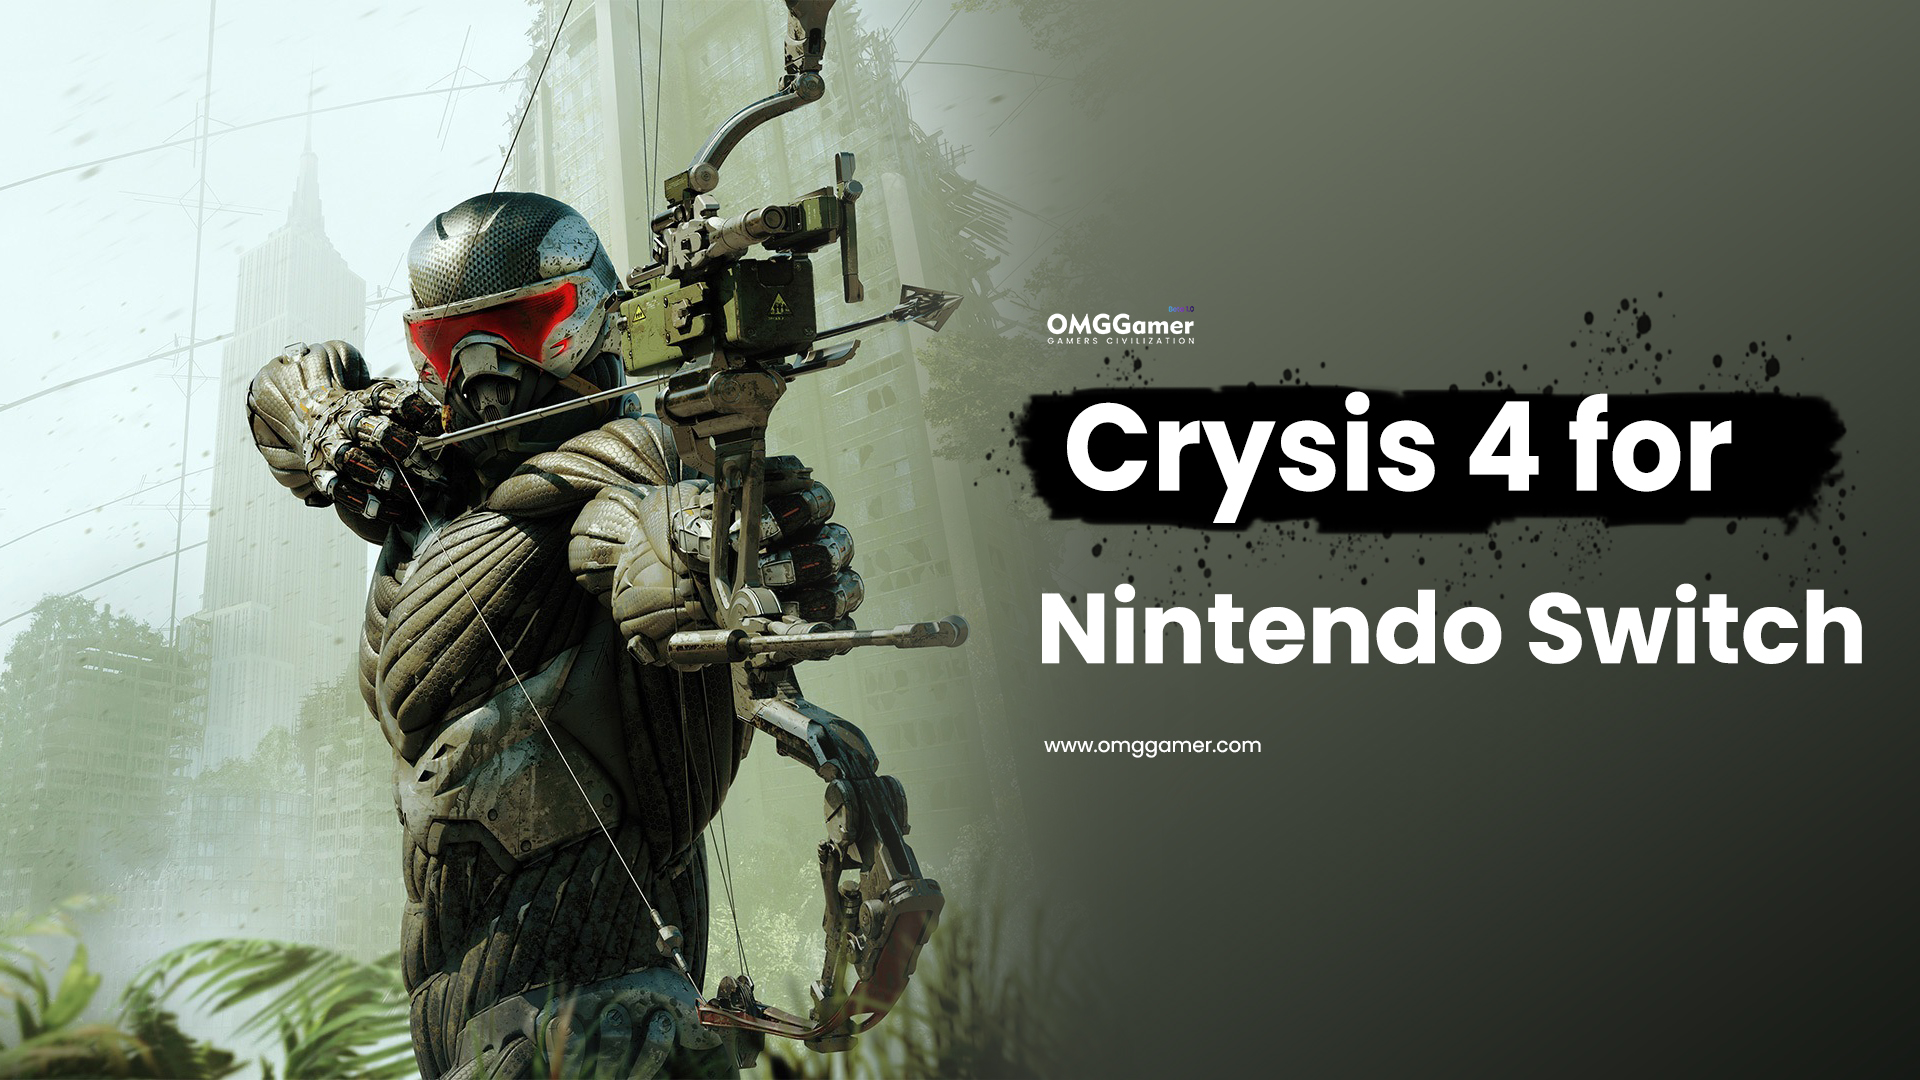 Crysis 4 for Nintendo Switch